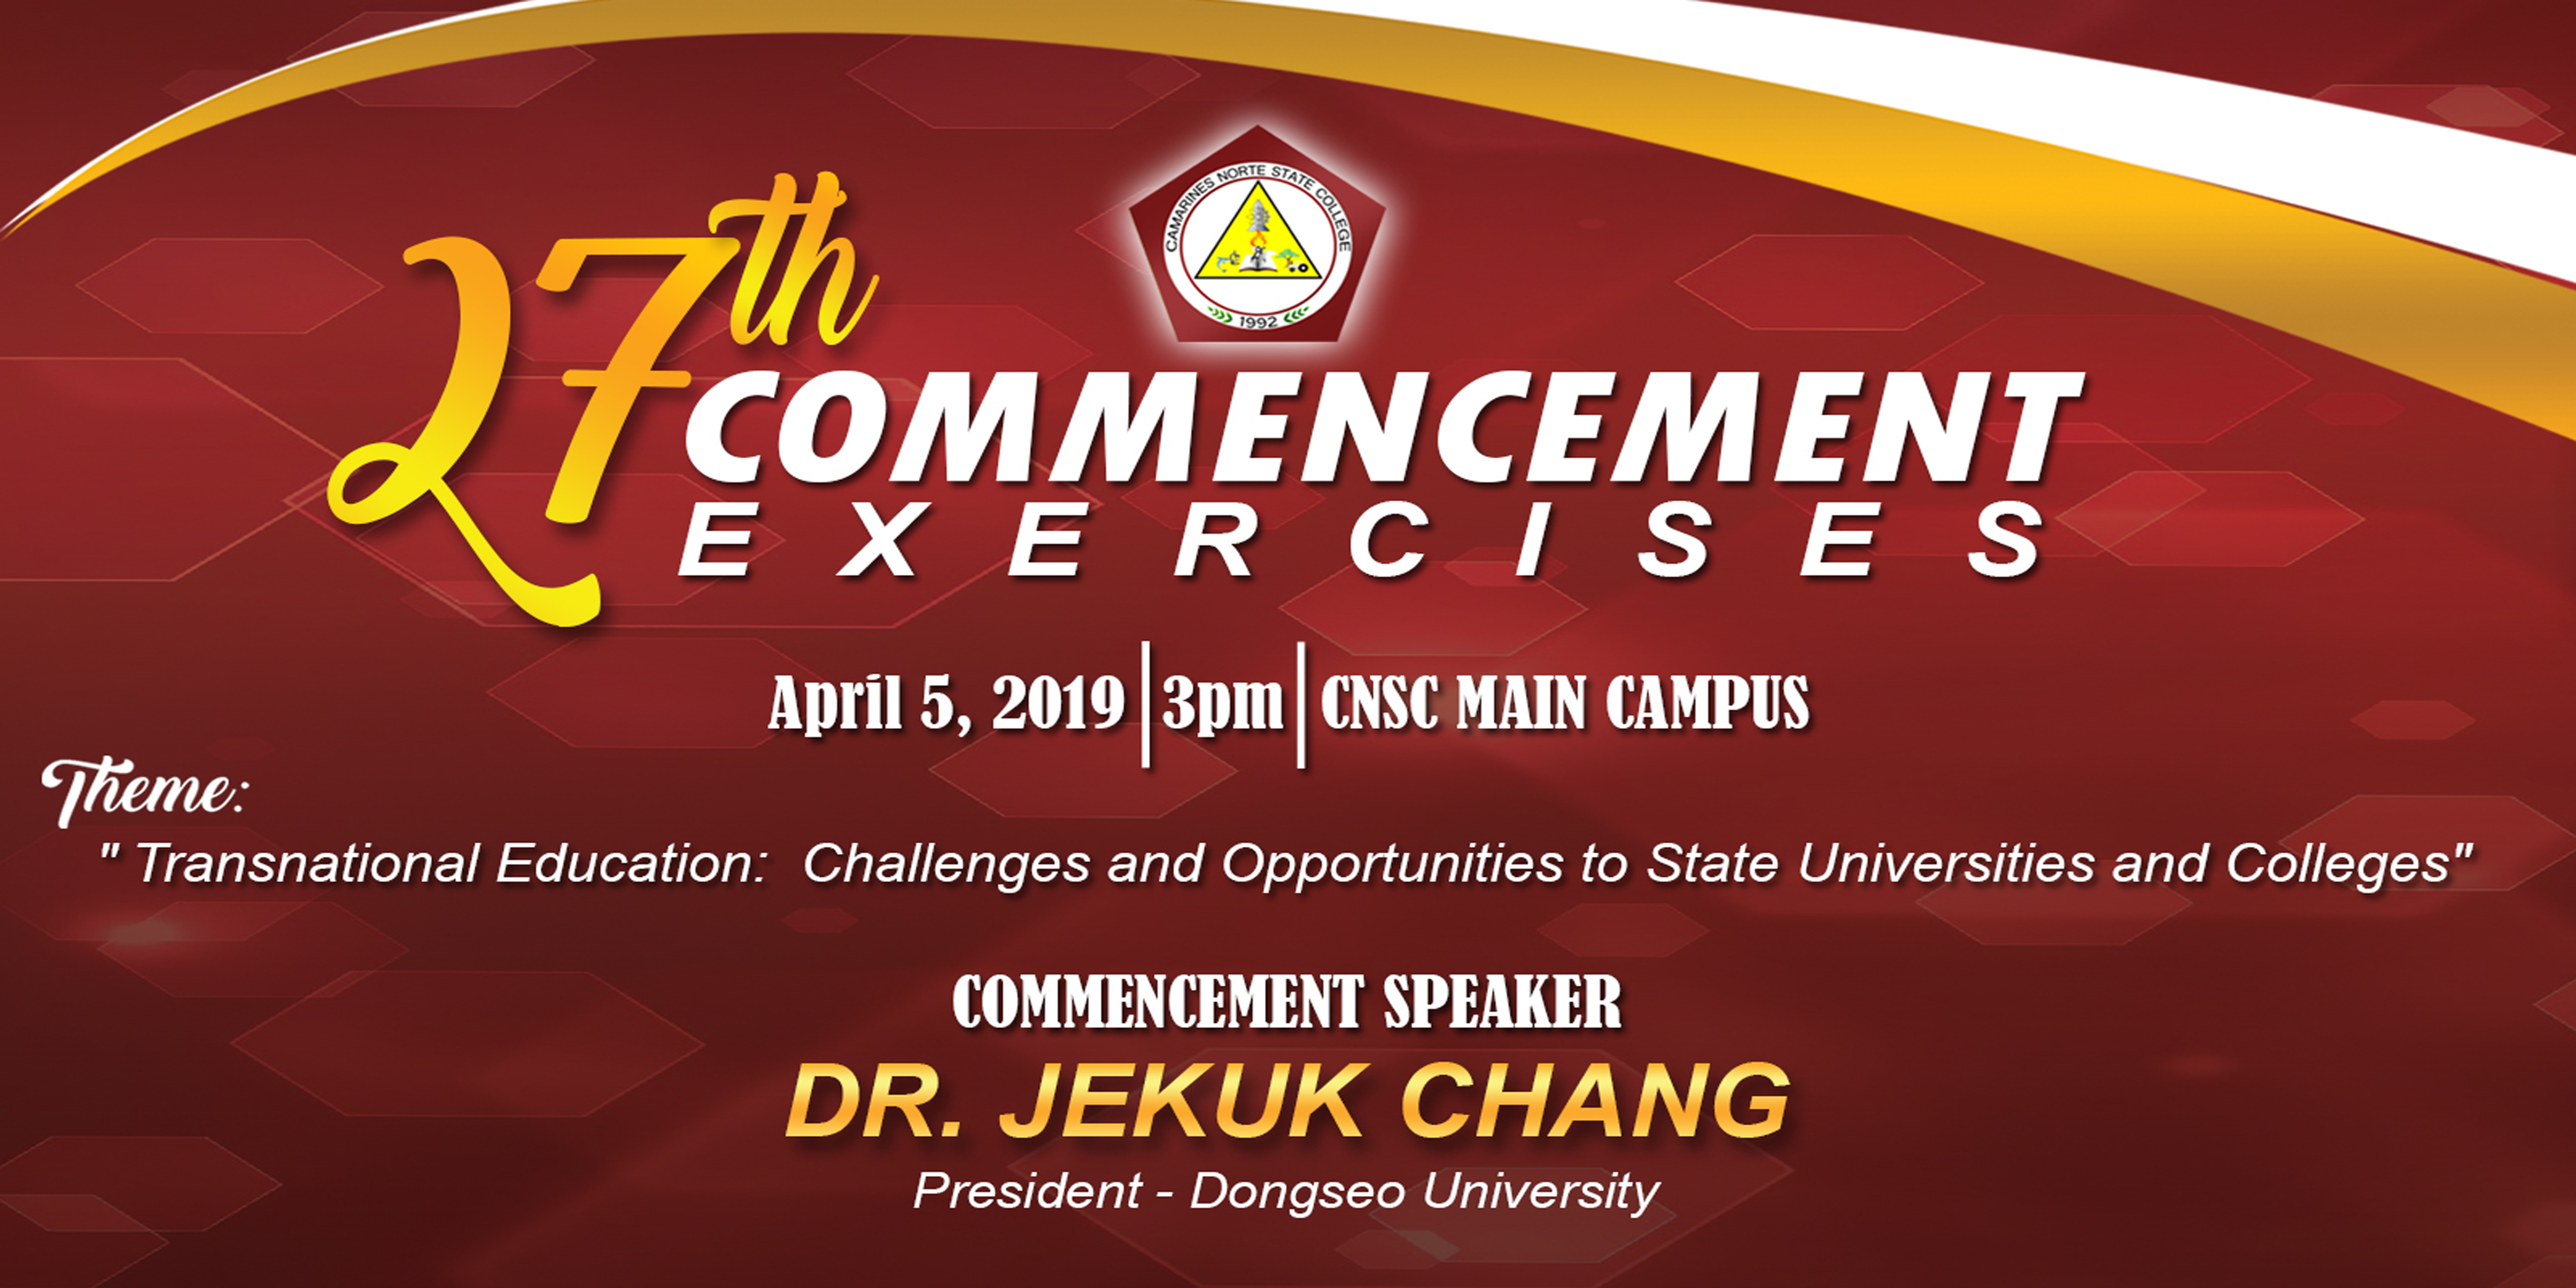 27th Commencement Exercises held